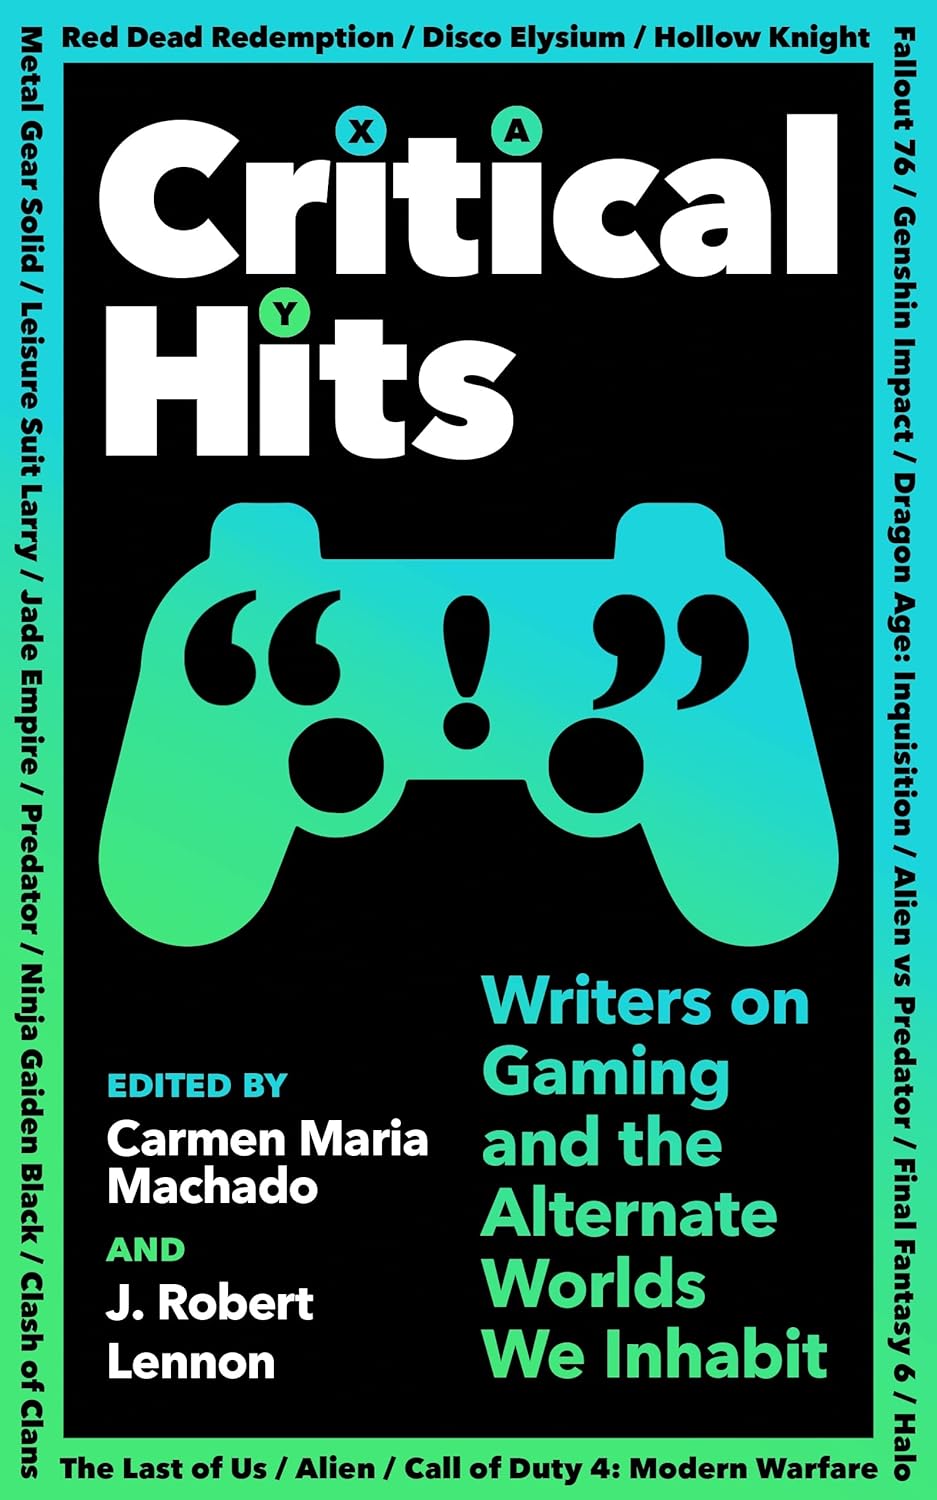 Critical Hits: Writers on gaming and the alternate worlds we inhabit